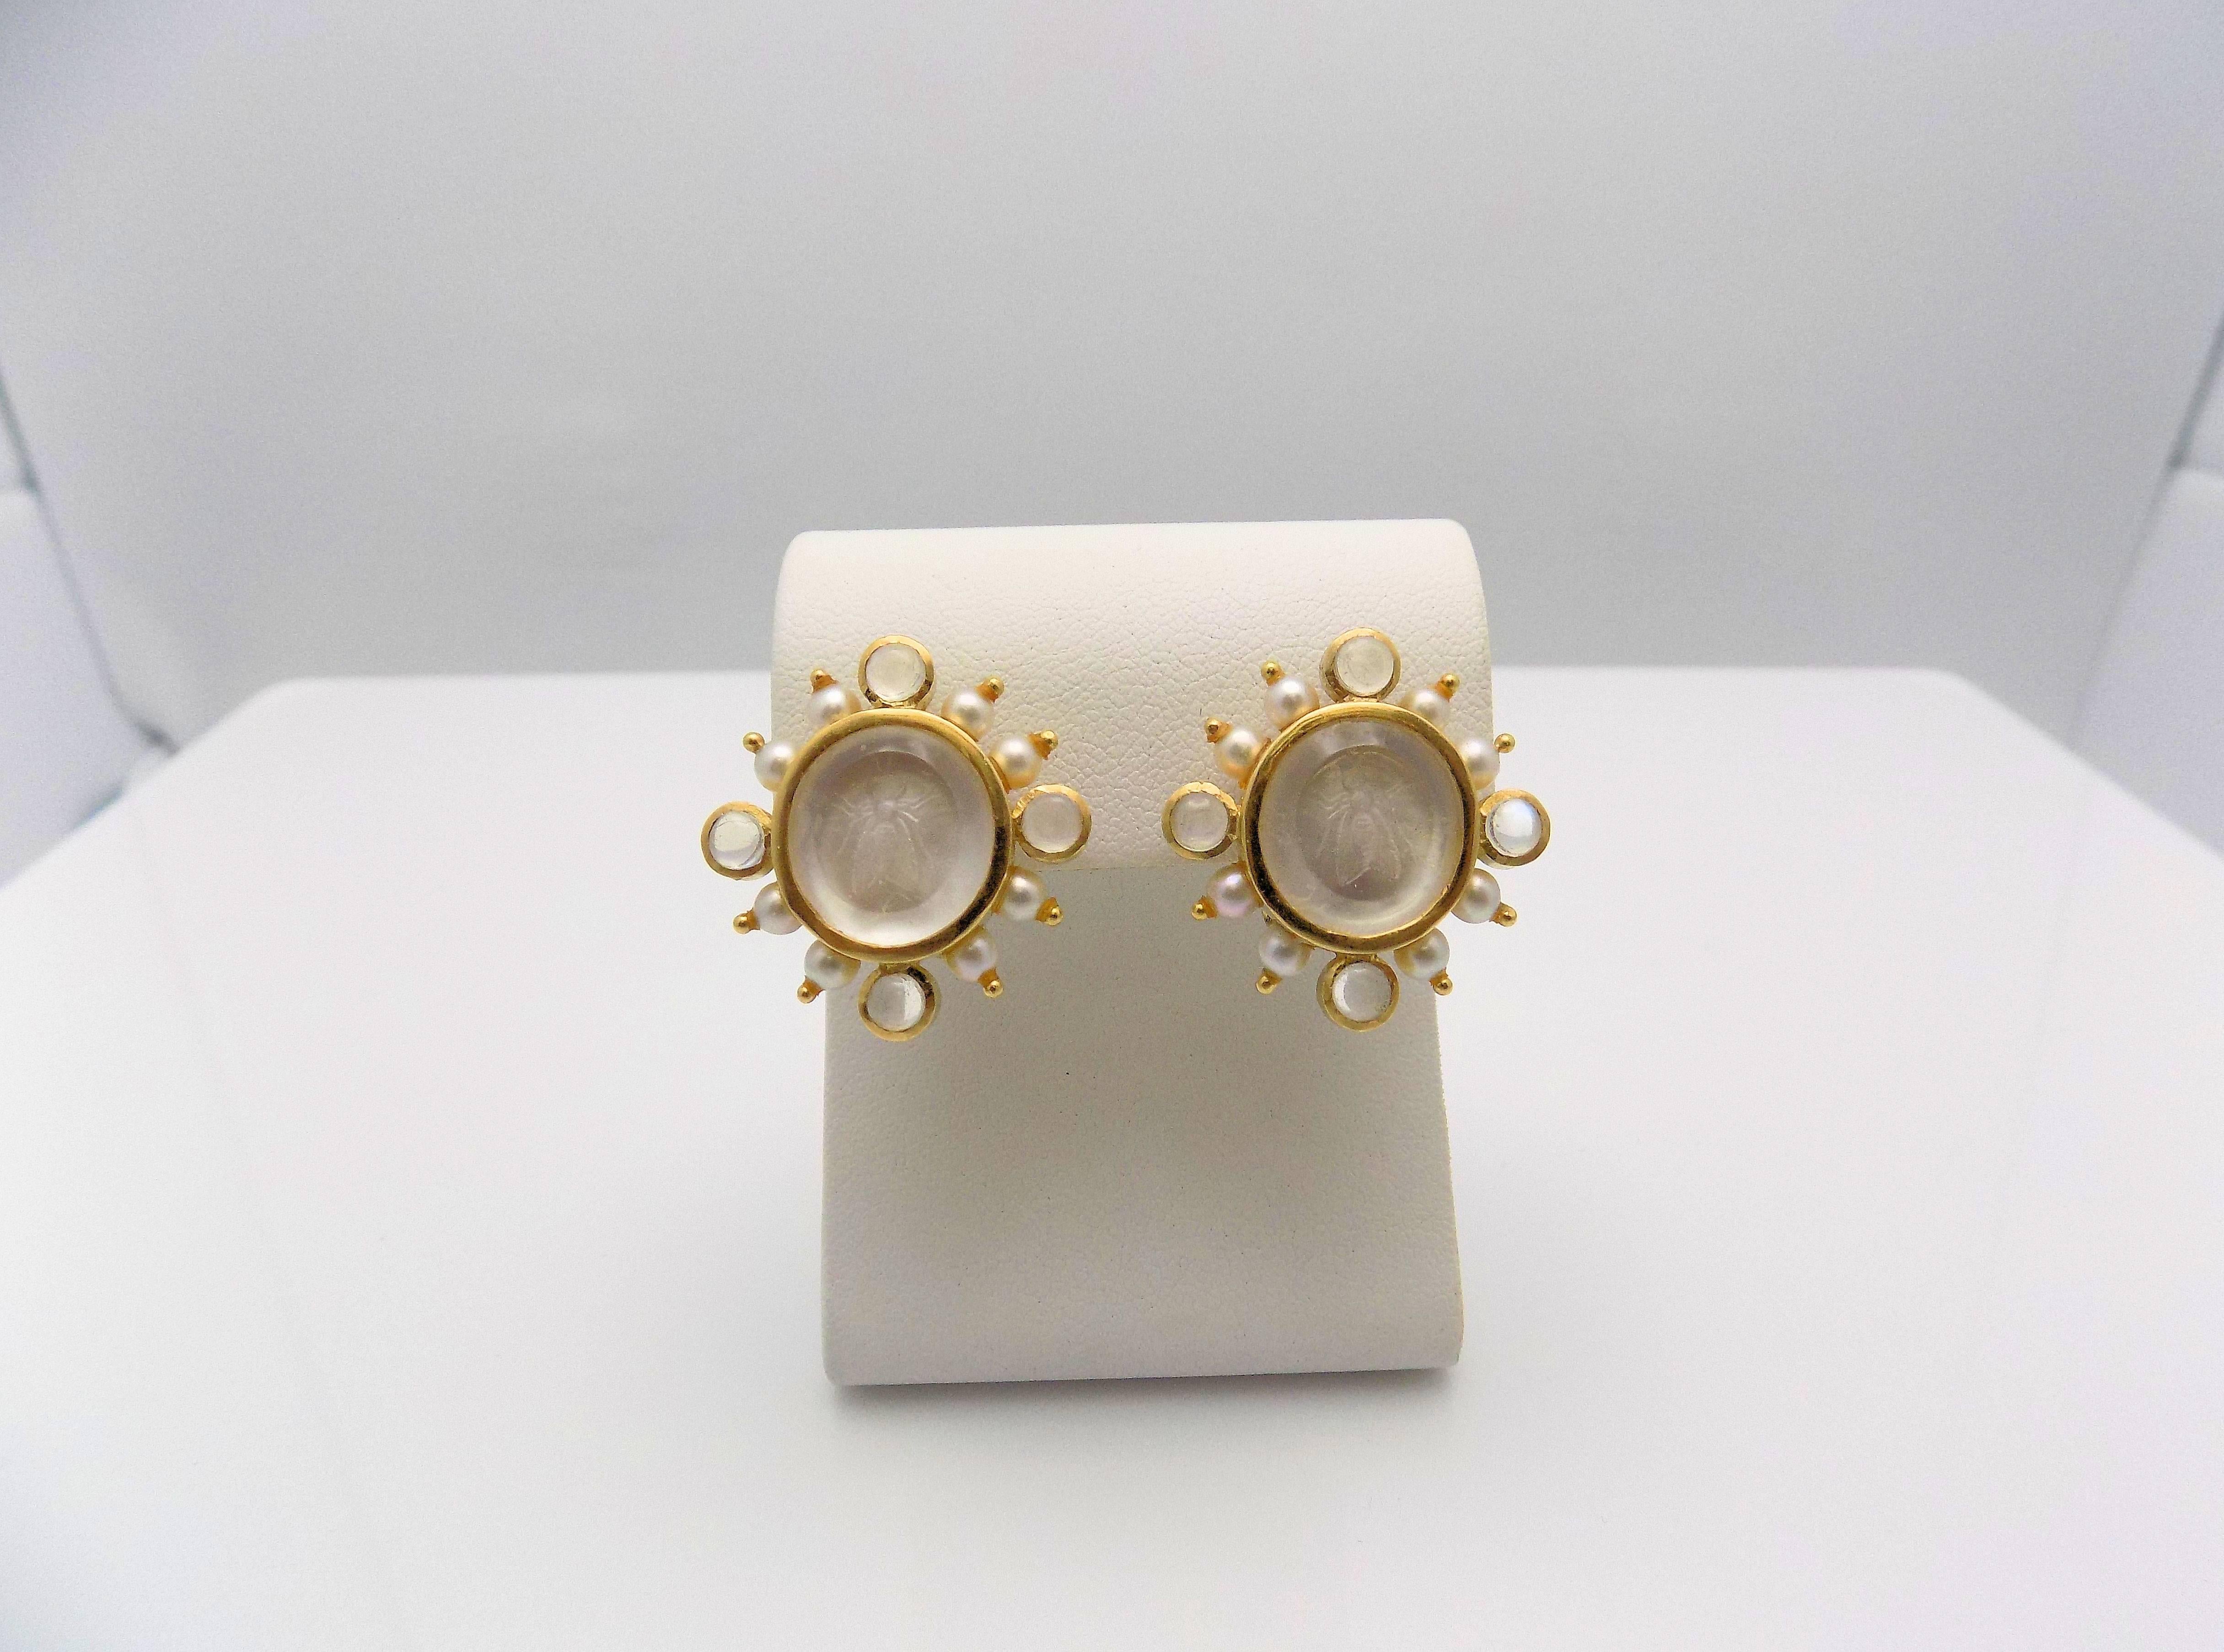 Pair 18 Karat Yellow Gold Clip/Pierced (convertible/fold down posts for either clip-on or pierced) Earrings. Mother of Pearl Bee's. 8 Round Cabochon Cut Moonstones 3.5 MM each; 16 Round Cultured Pearls 3.5 MM each. Signed: Locke. 11.4 DWT or 17.72